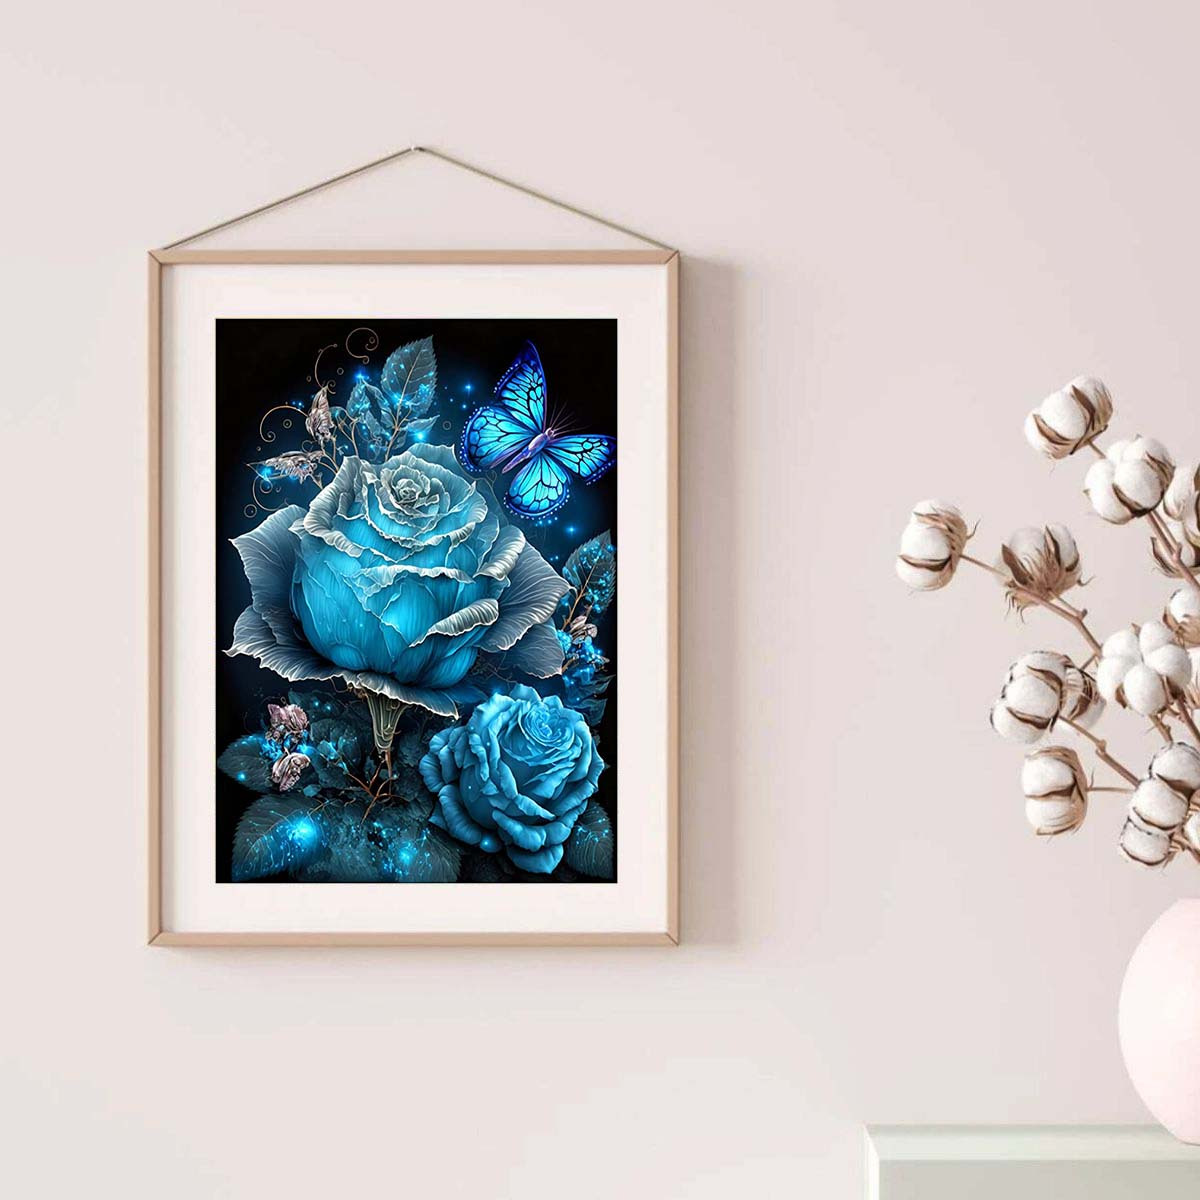 5D Diamond Painting Stitch and Roses Kit